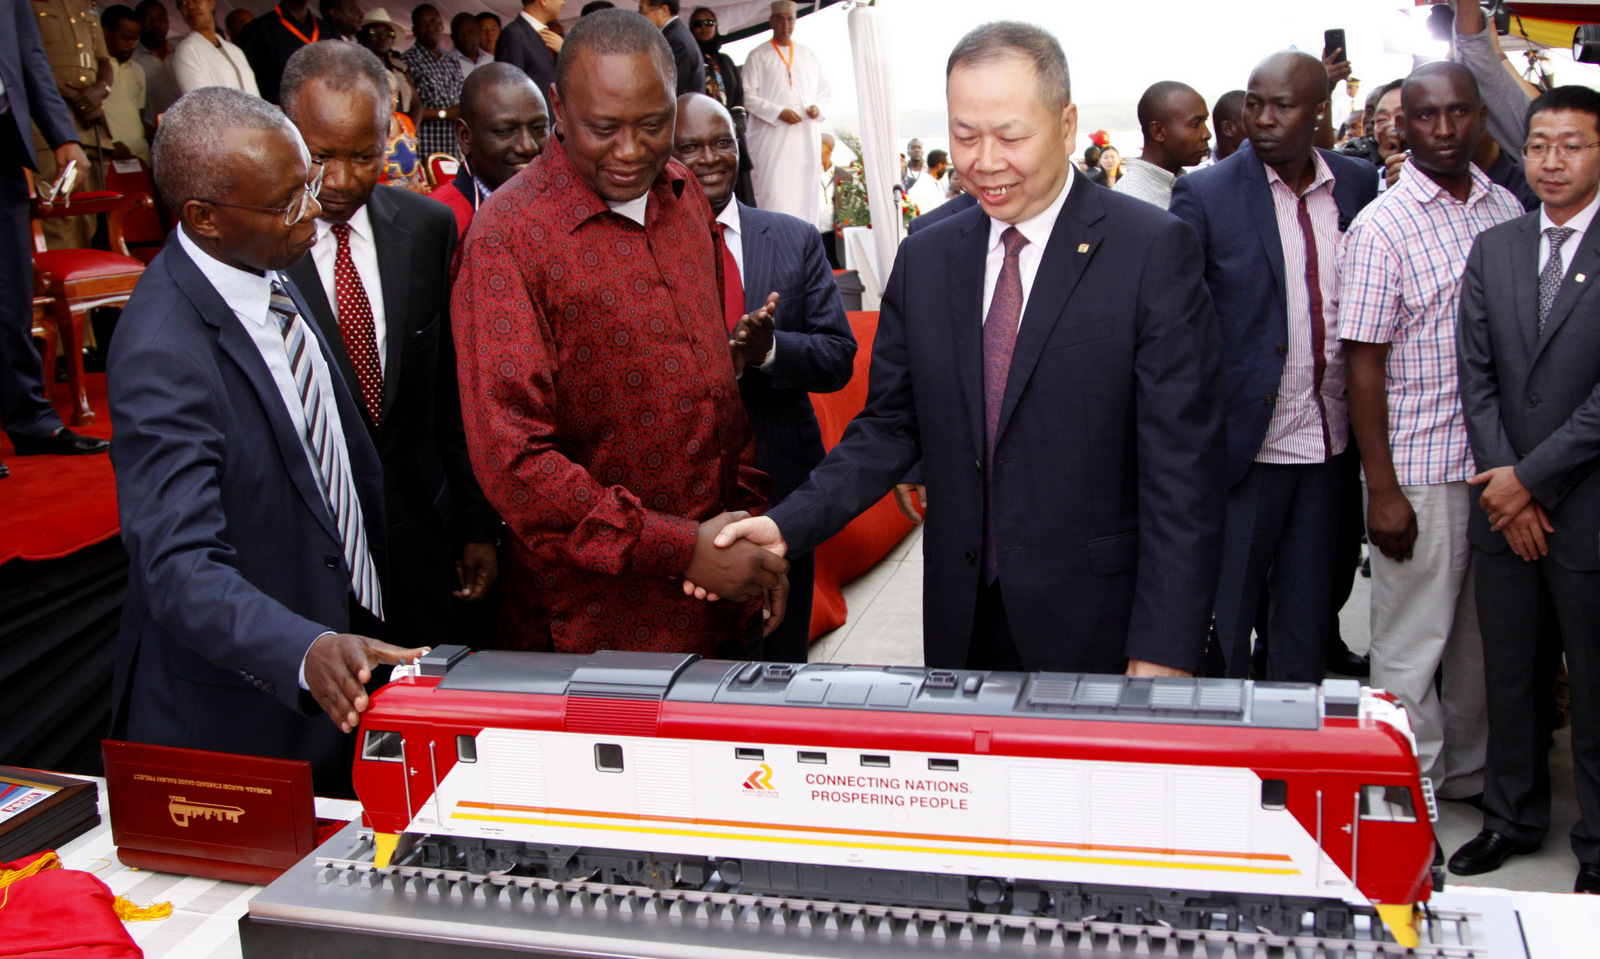 Kenyan President Uhuru Kenyatta 2nd left, and Chen Fenjian president of CCC shaking hands next to a model of a locomotive in Mombasa, Kenya, May 30, 2017. The president opened the country's largest infrastructure project since independence, a Chinese-backed railway costing nearly $3.3 billion that eventually will link a large part of East Africa to a major port on the Indian Ocean. (AP/Khalil Senosi)